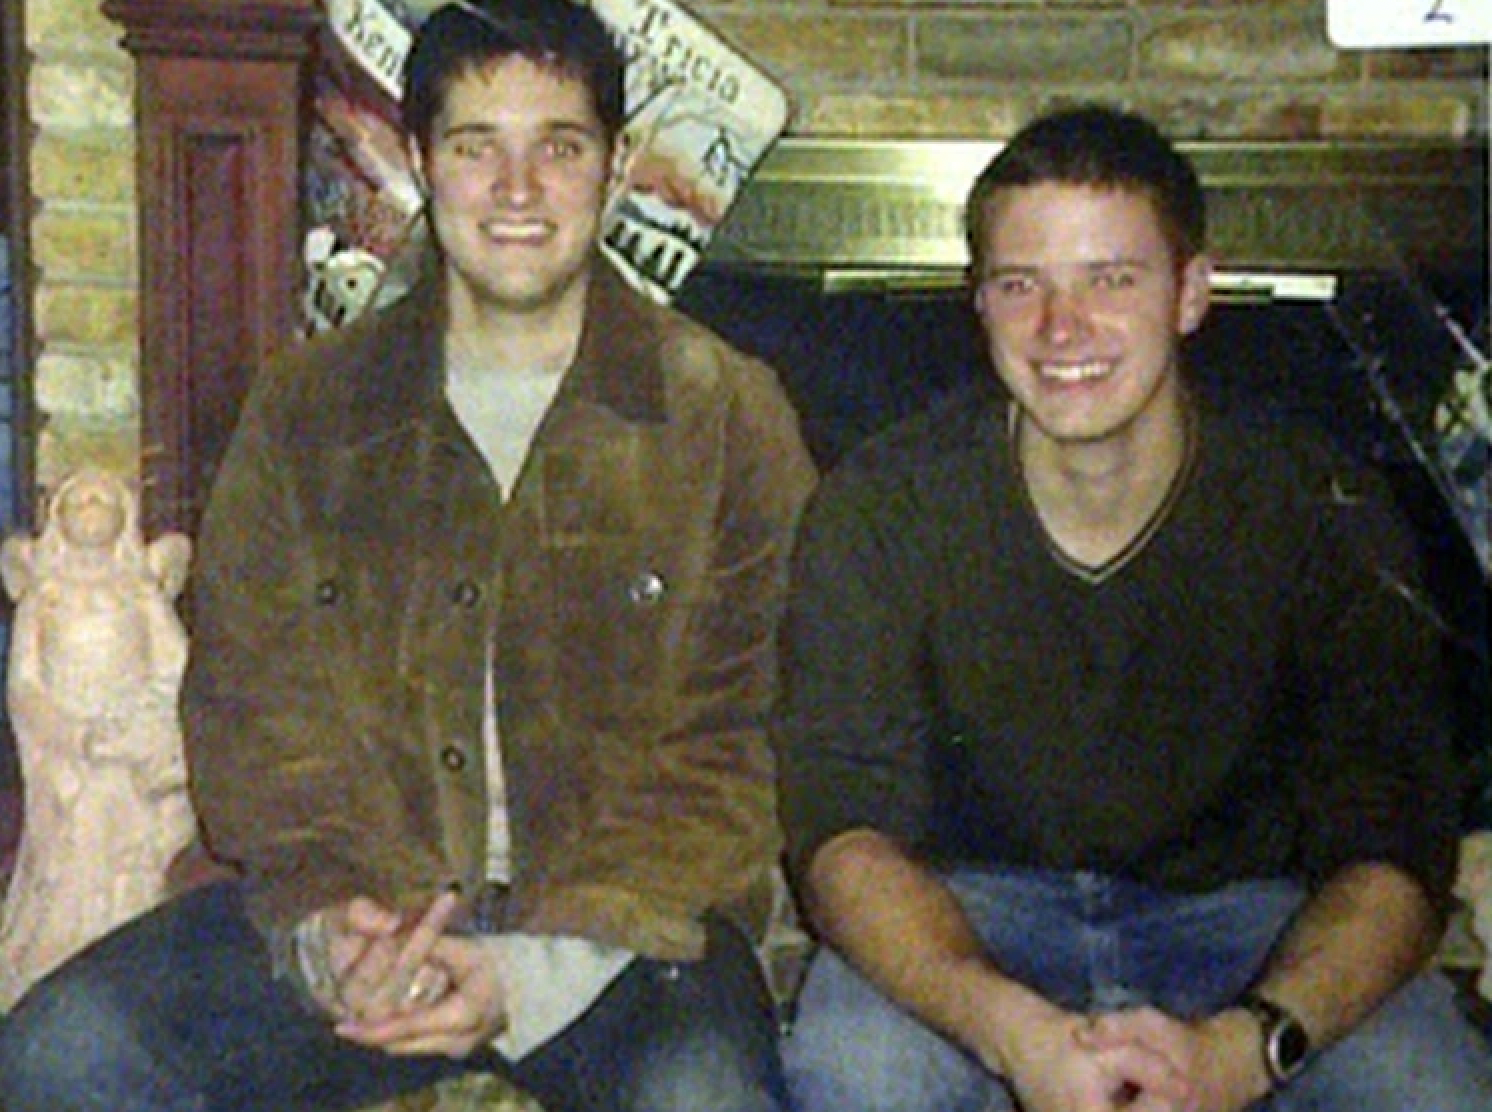 Two brothers smiling, Kevin and Bart Whitaker. Hours later after arriving home from dinner, Bart killed Kevin and his mother after conspiring with a friend. He tried to kill his father as well, but he survived. It's a horrible story. I don't know what became of Bart though, all I know is that his father somehow found the courage to forgive him.